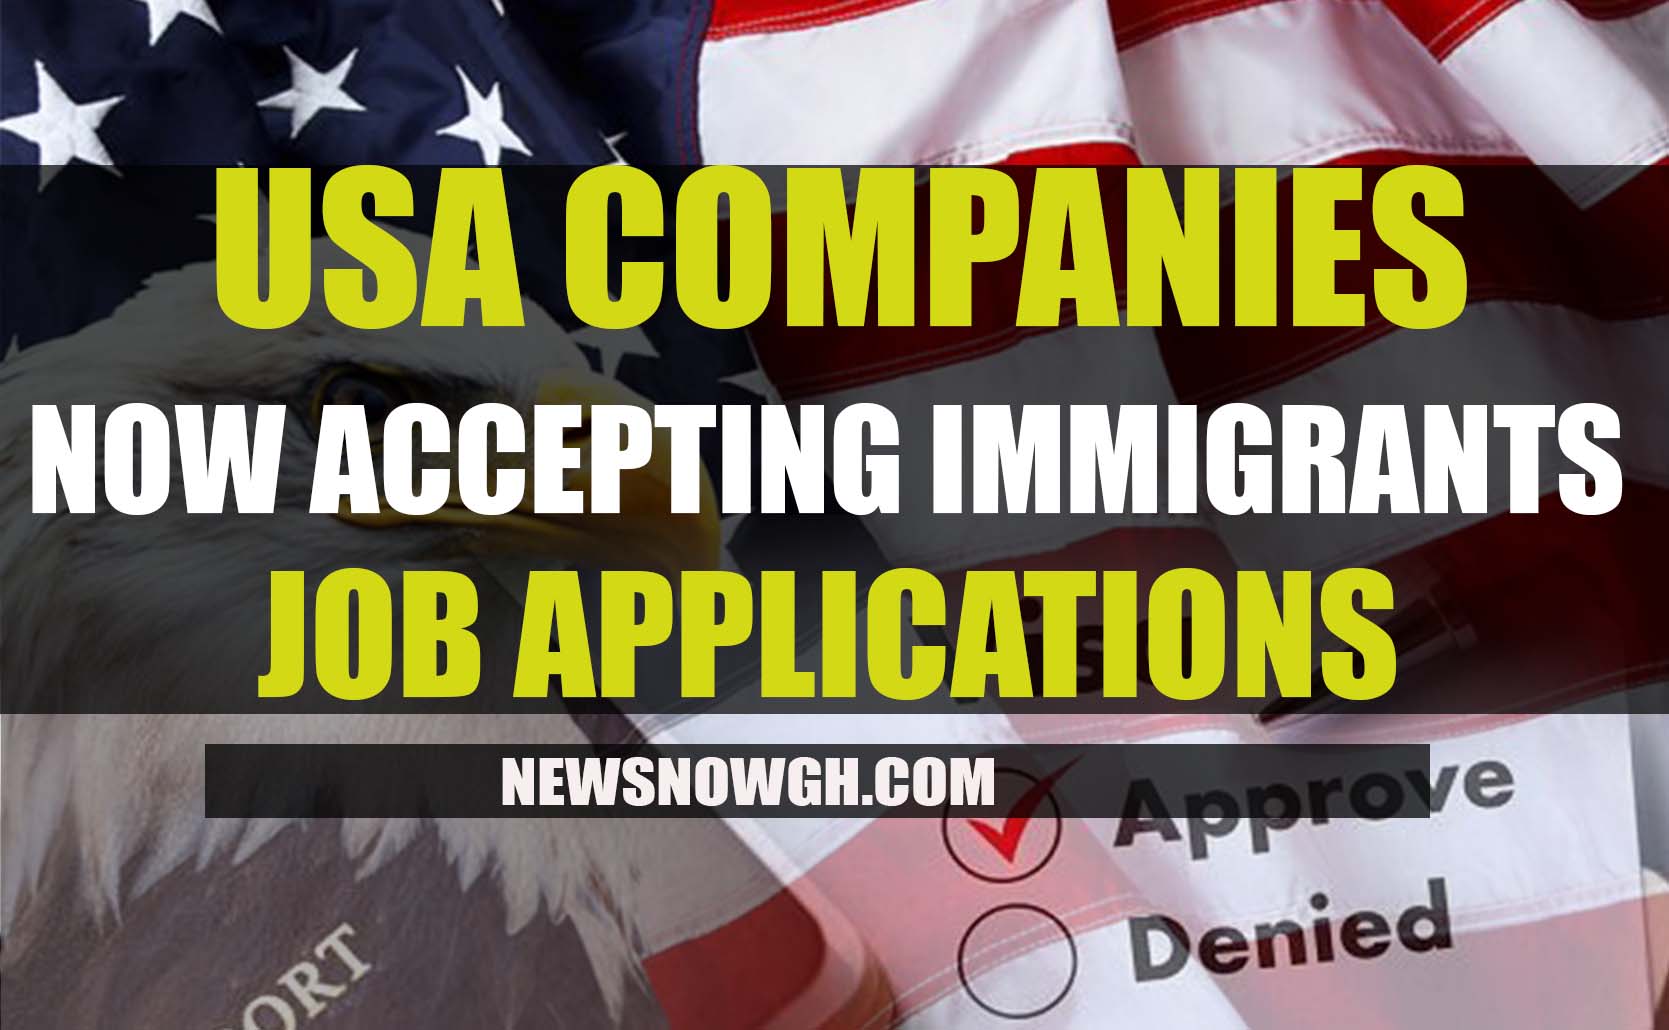 USA companies now accepting immigrants job applications